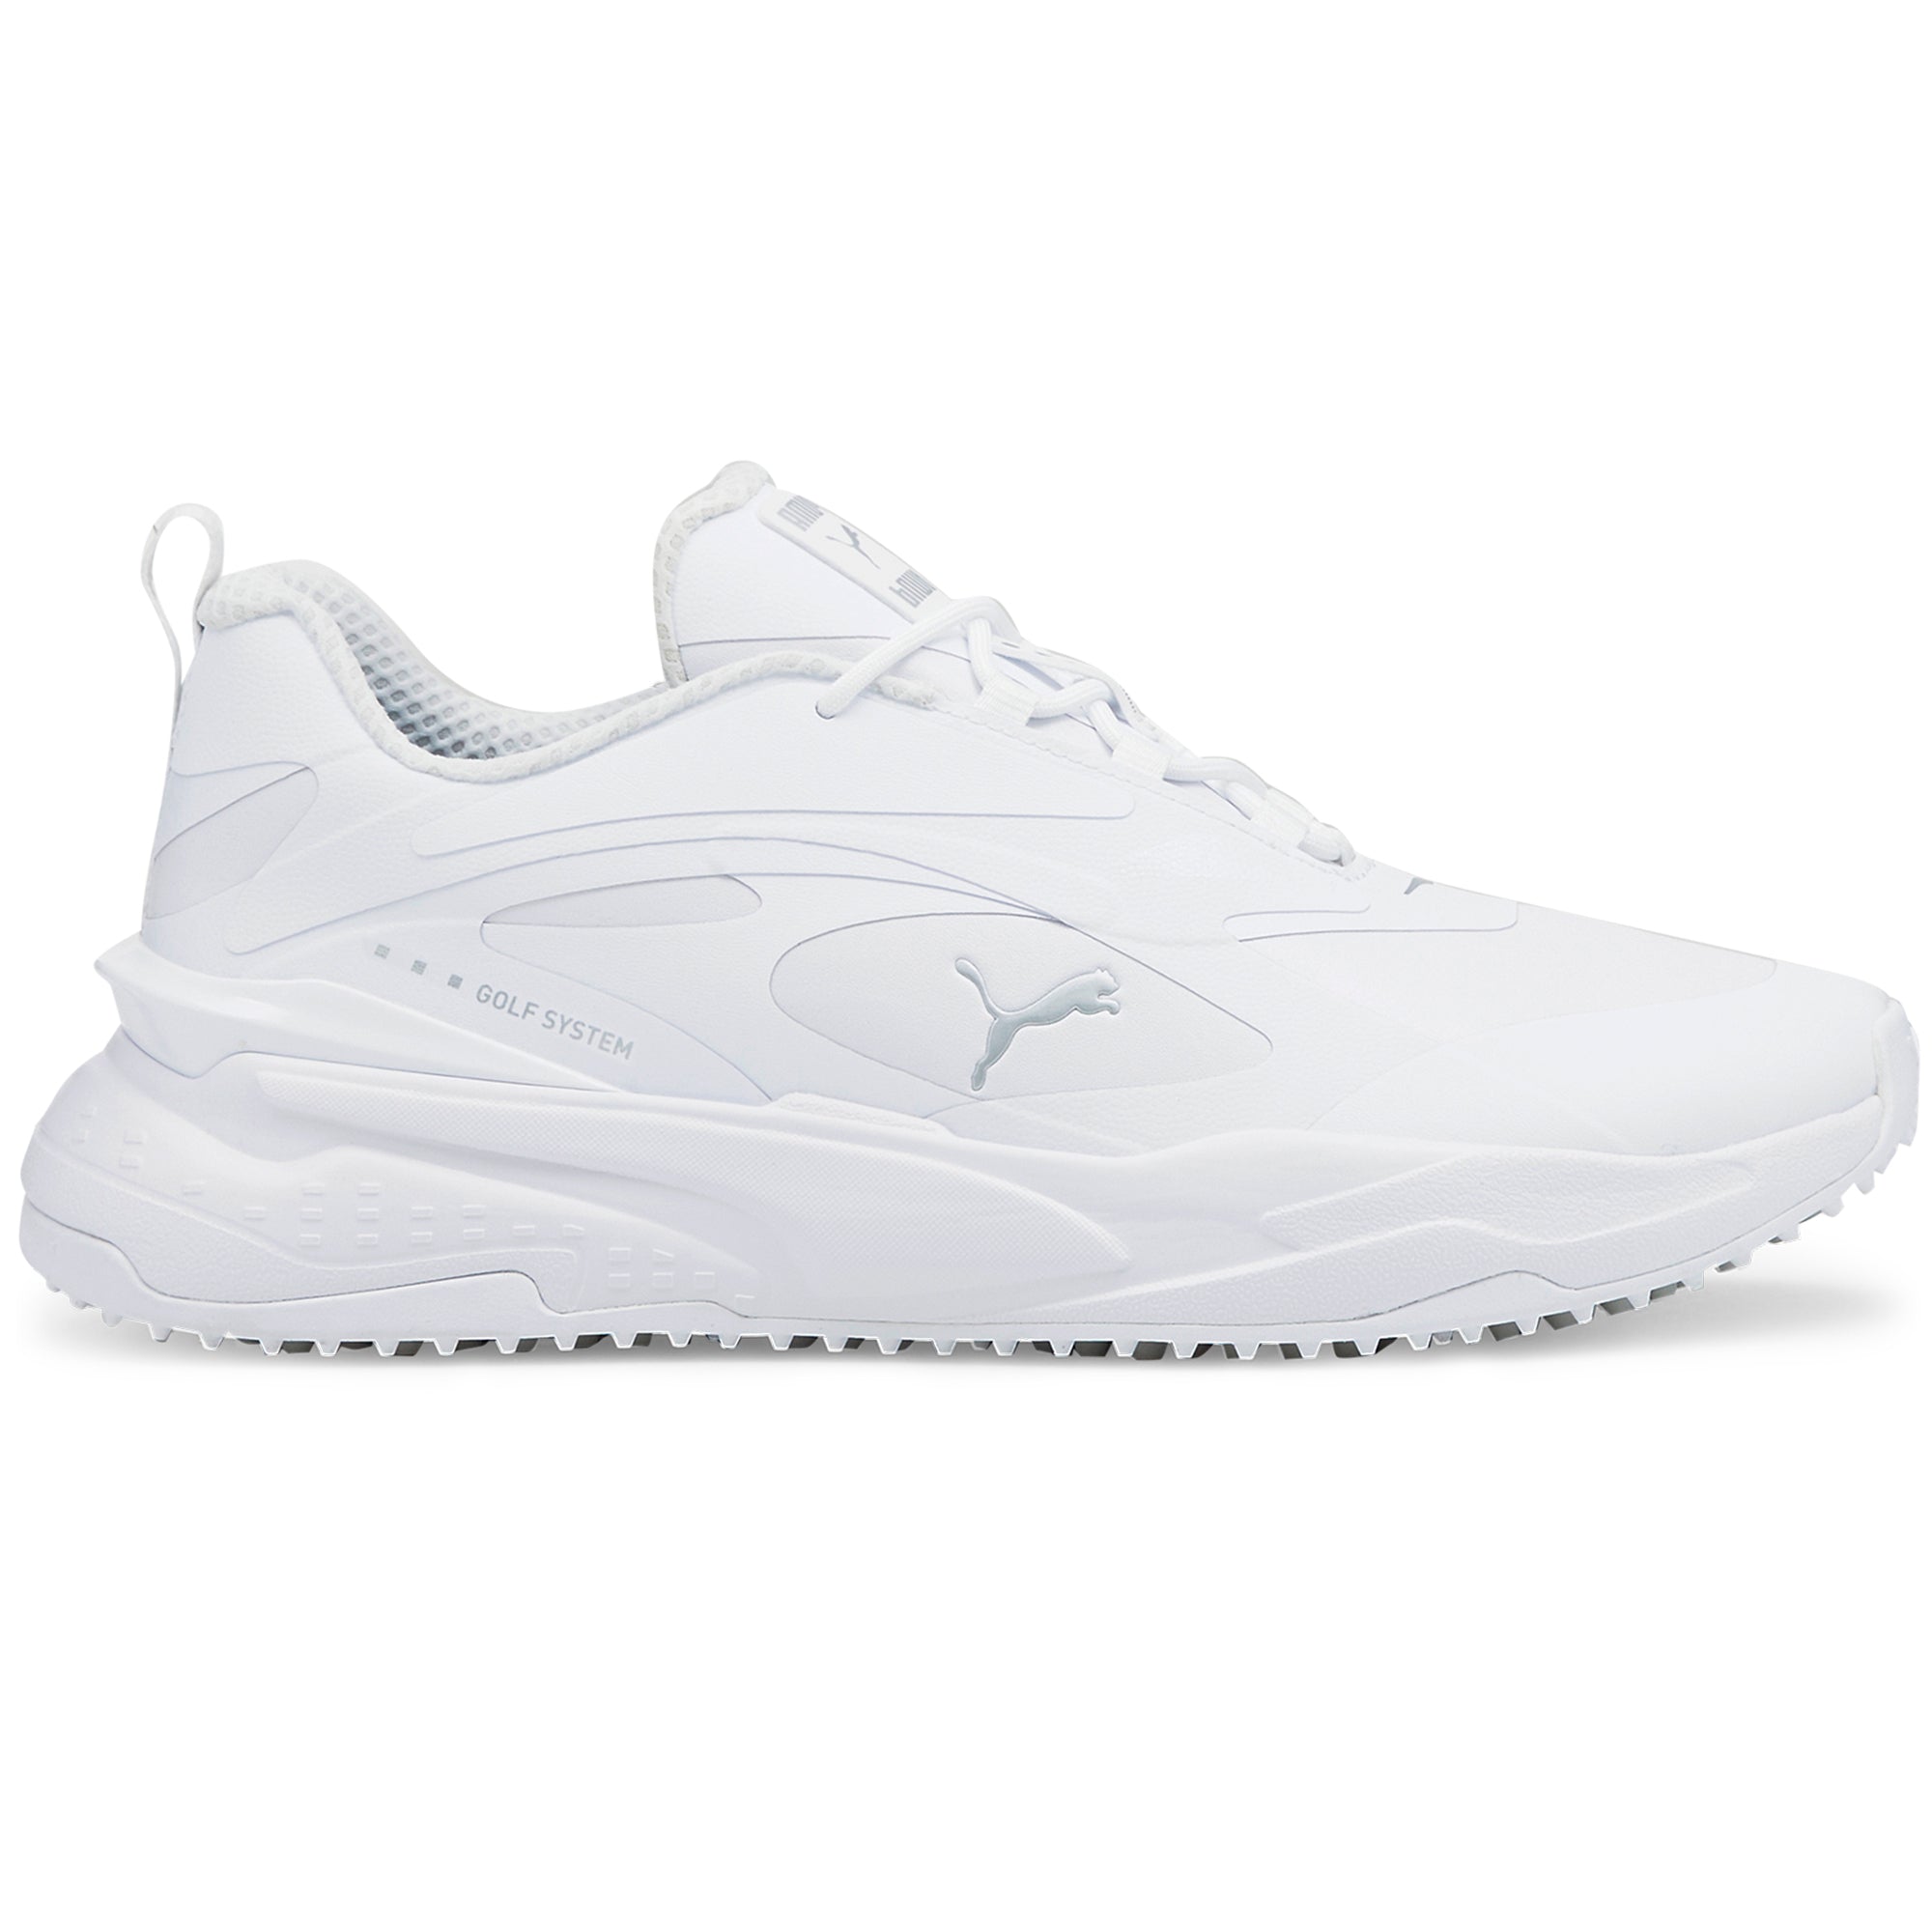 Puma GS-Fast Golf Shoes 376357 Puma White 05 & Function18 | Restrictedgs